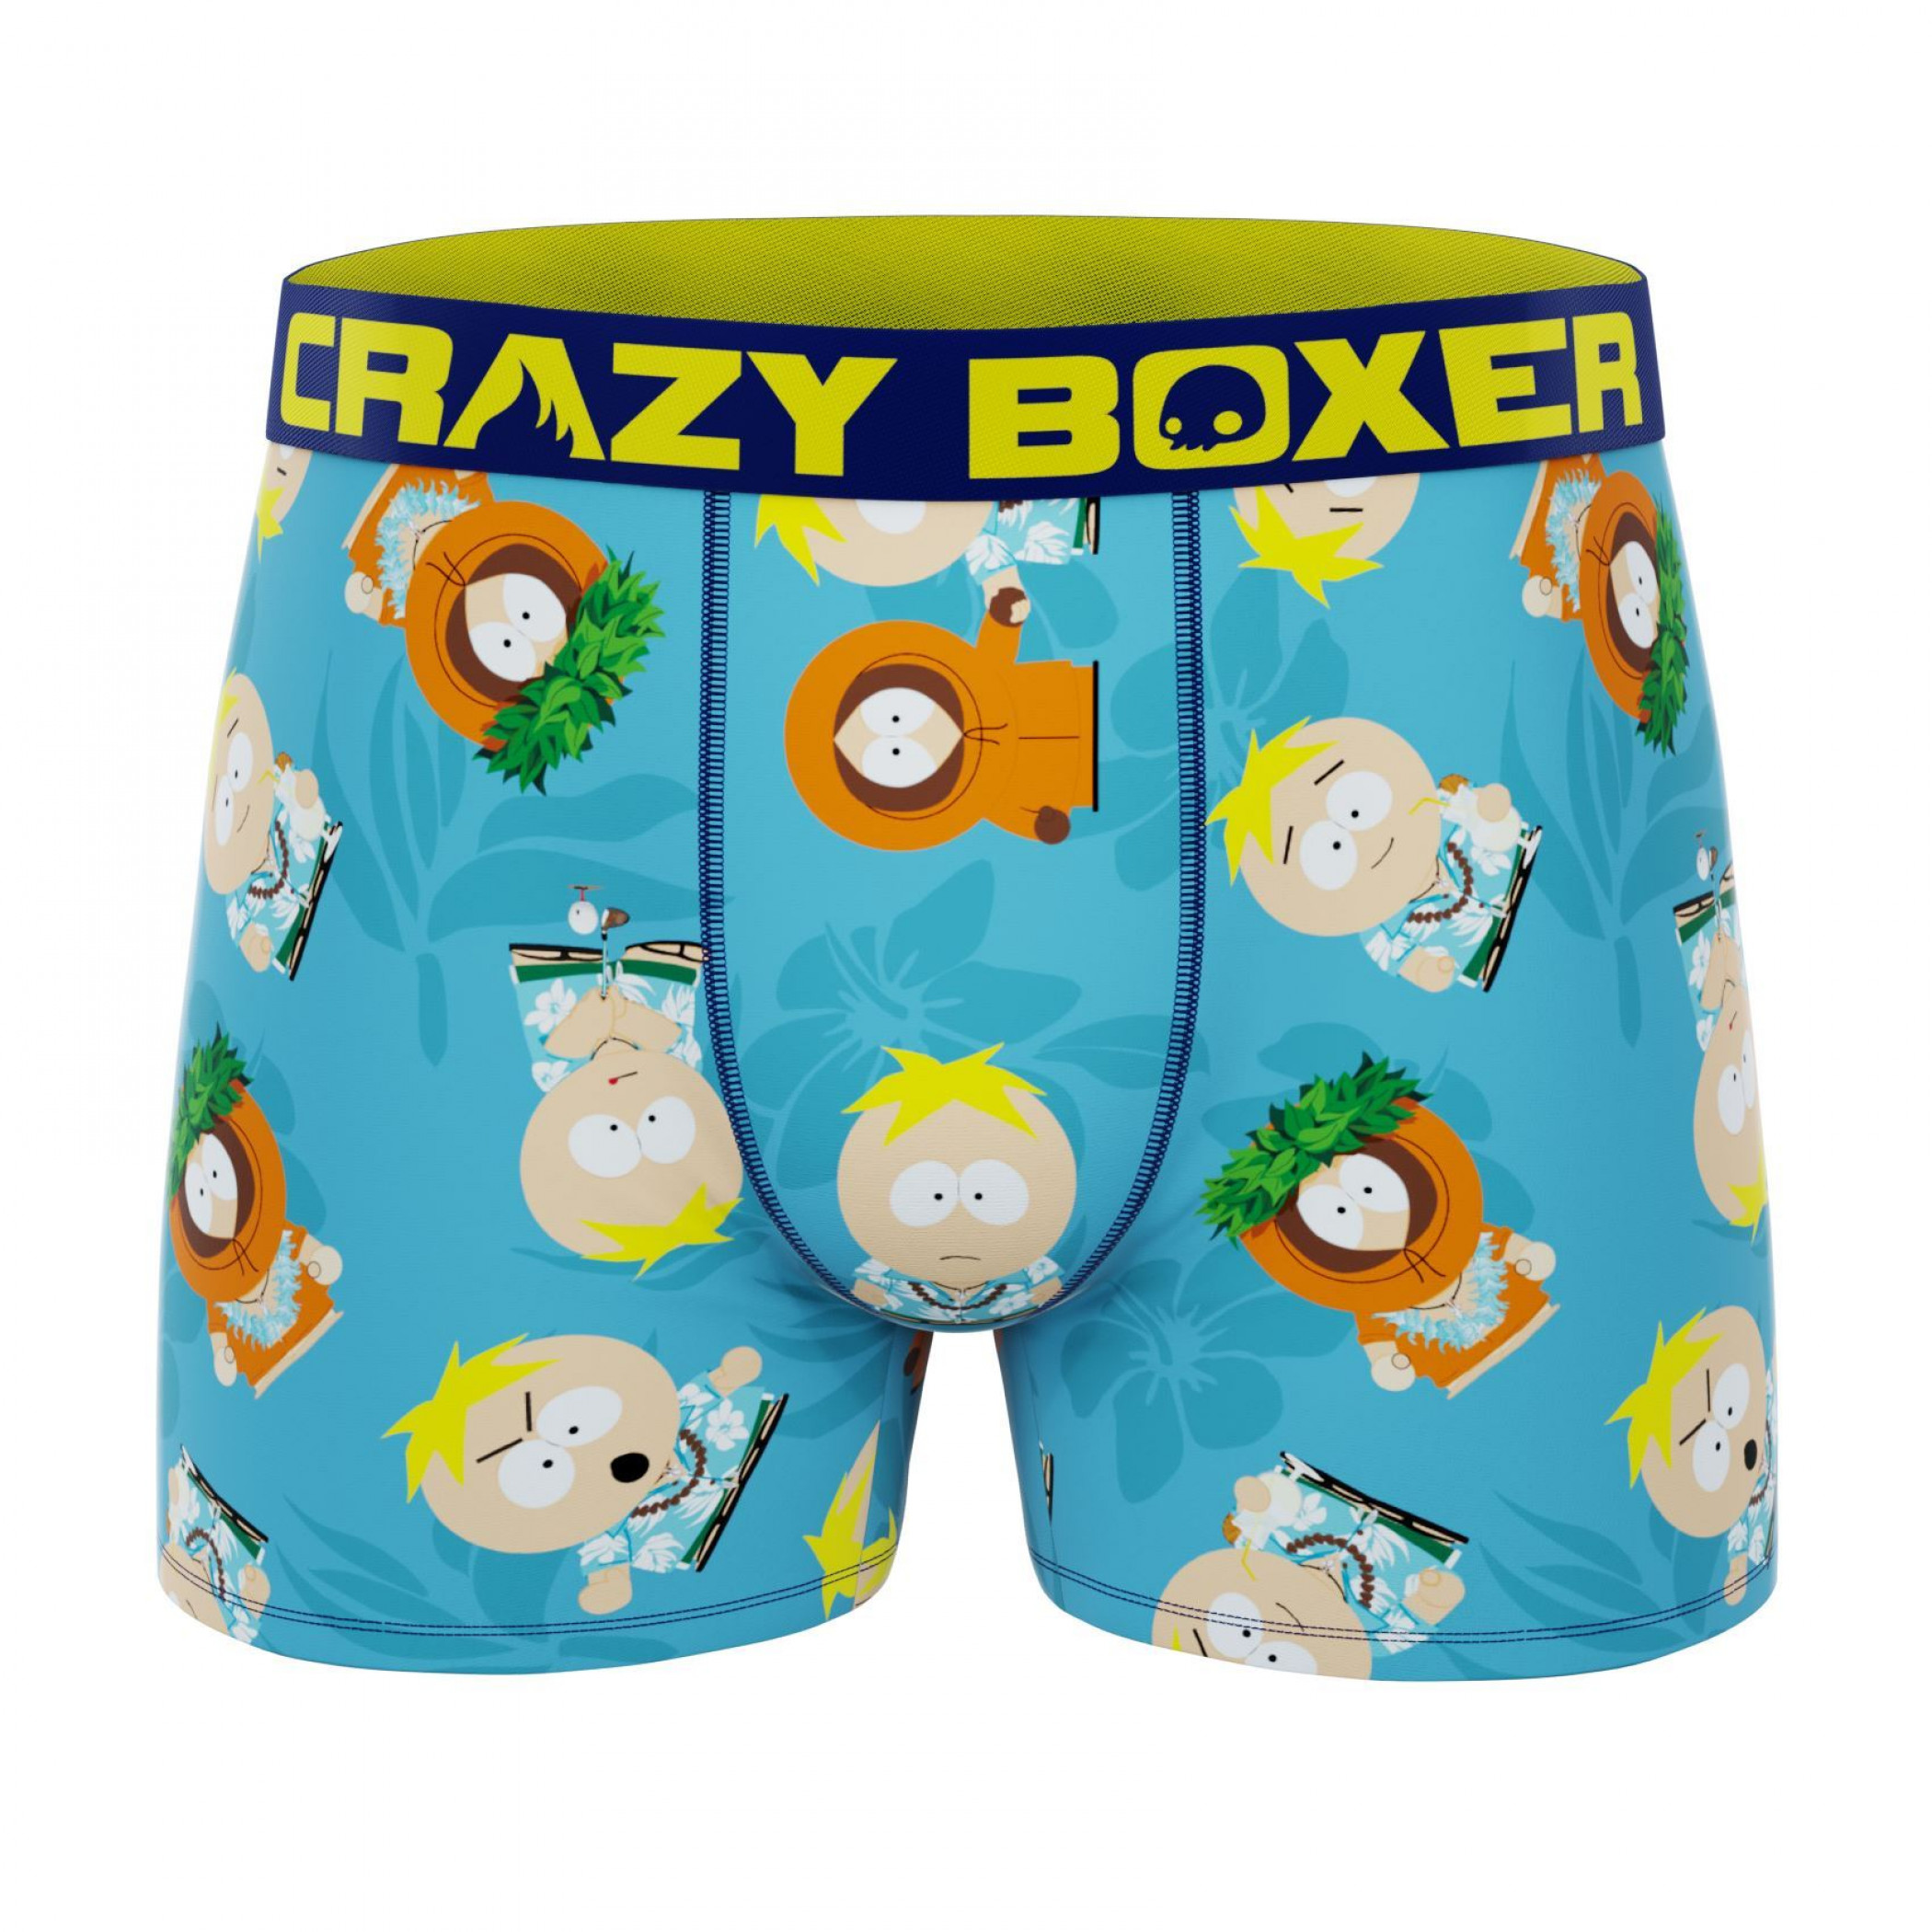 Crazy Boxers Bud Light Cans All Over Print Men's Boxer Briefs-Small (28-30)  